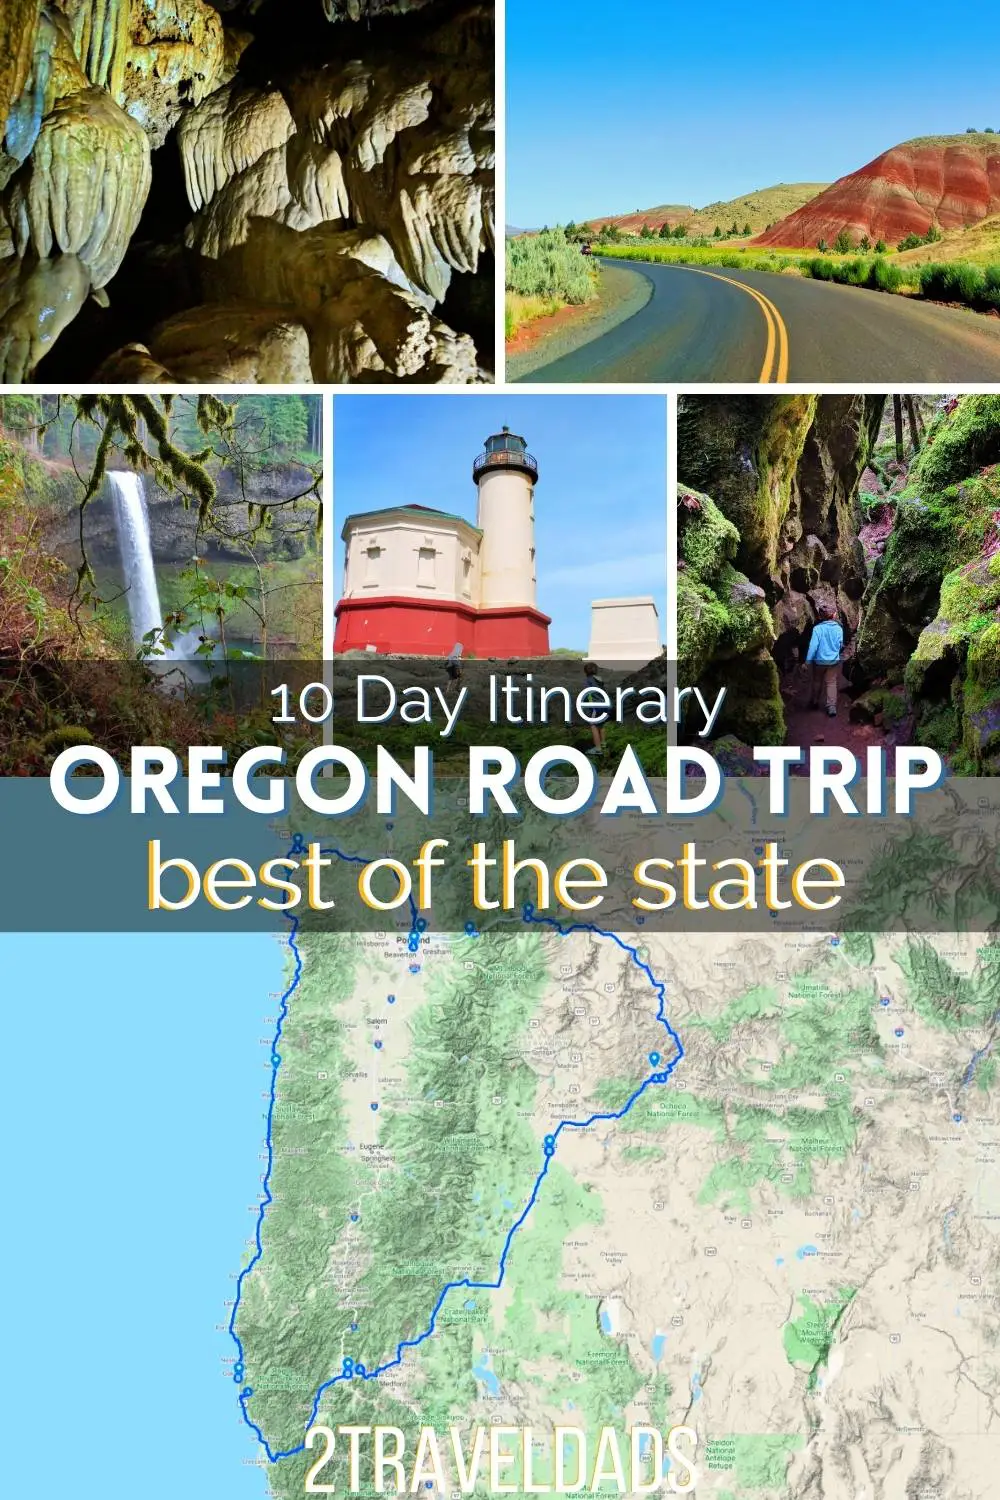 10 Road Trip plan for the best of Oregon, from the rugged Oregon Coast to the mountain waterfalls and the colorful high desert. Oregon's best sights in 10 days of epic road trip.